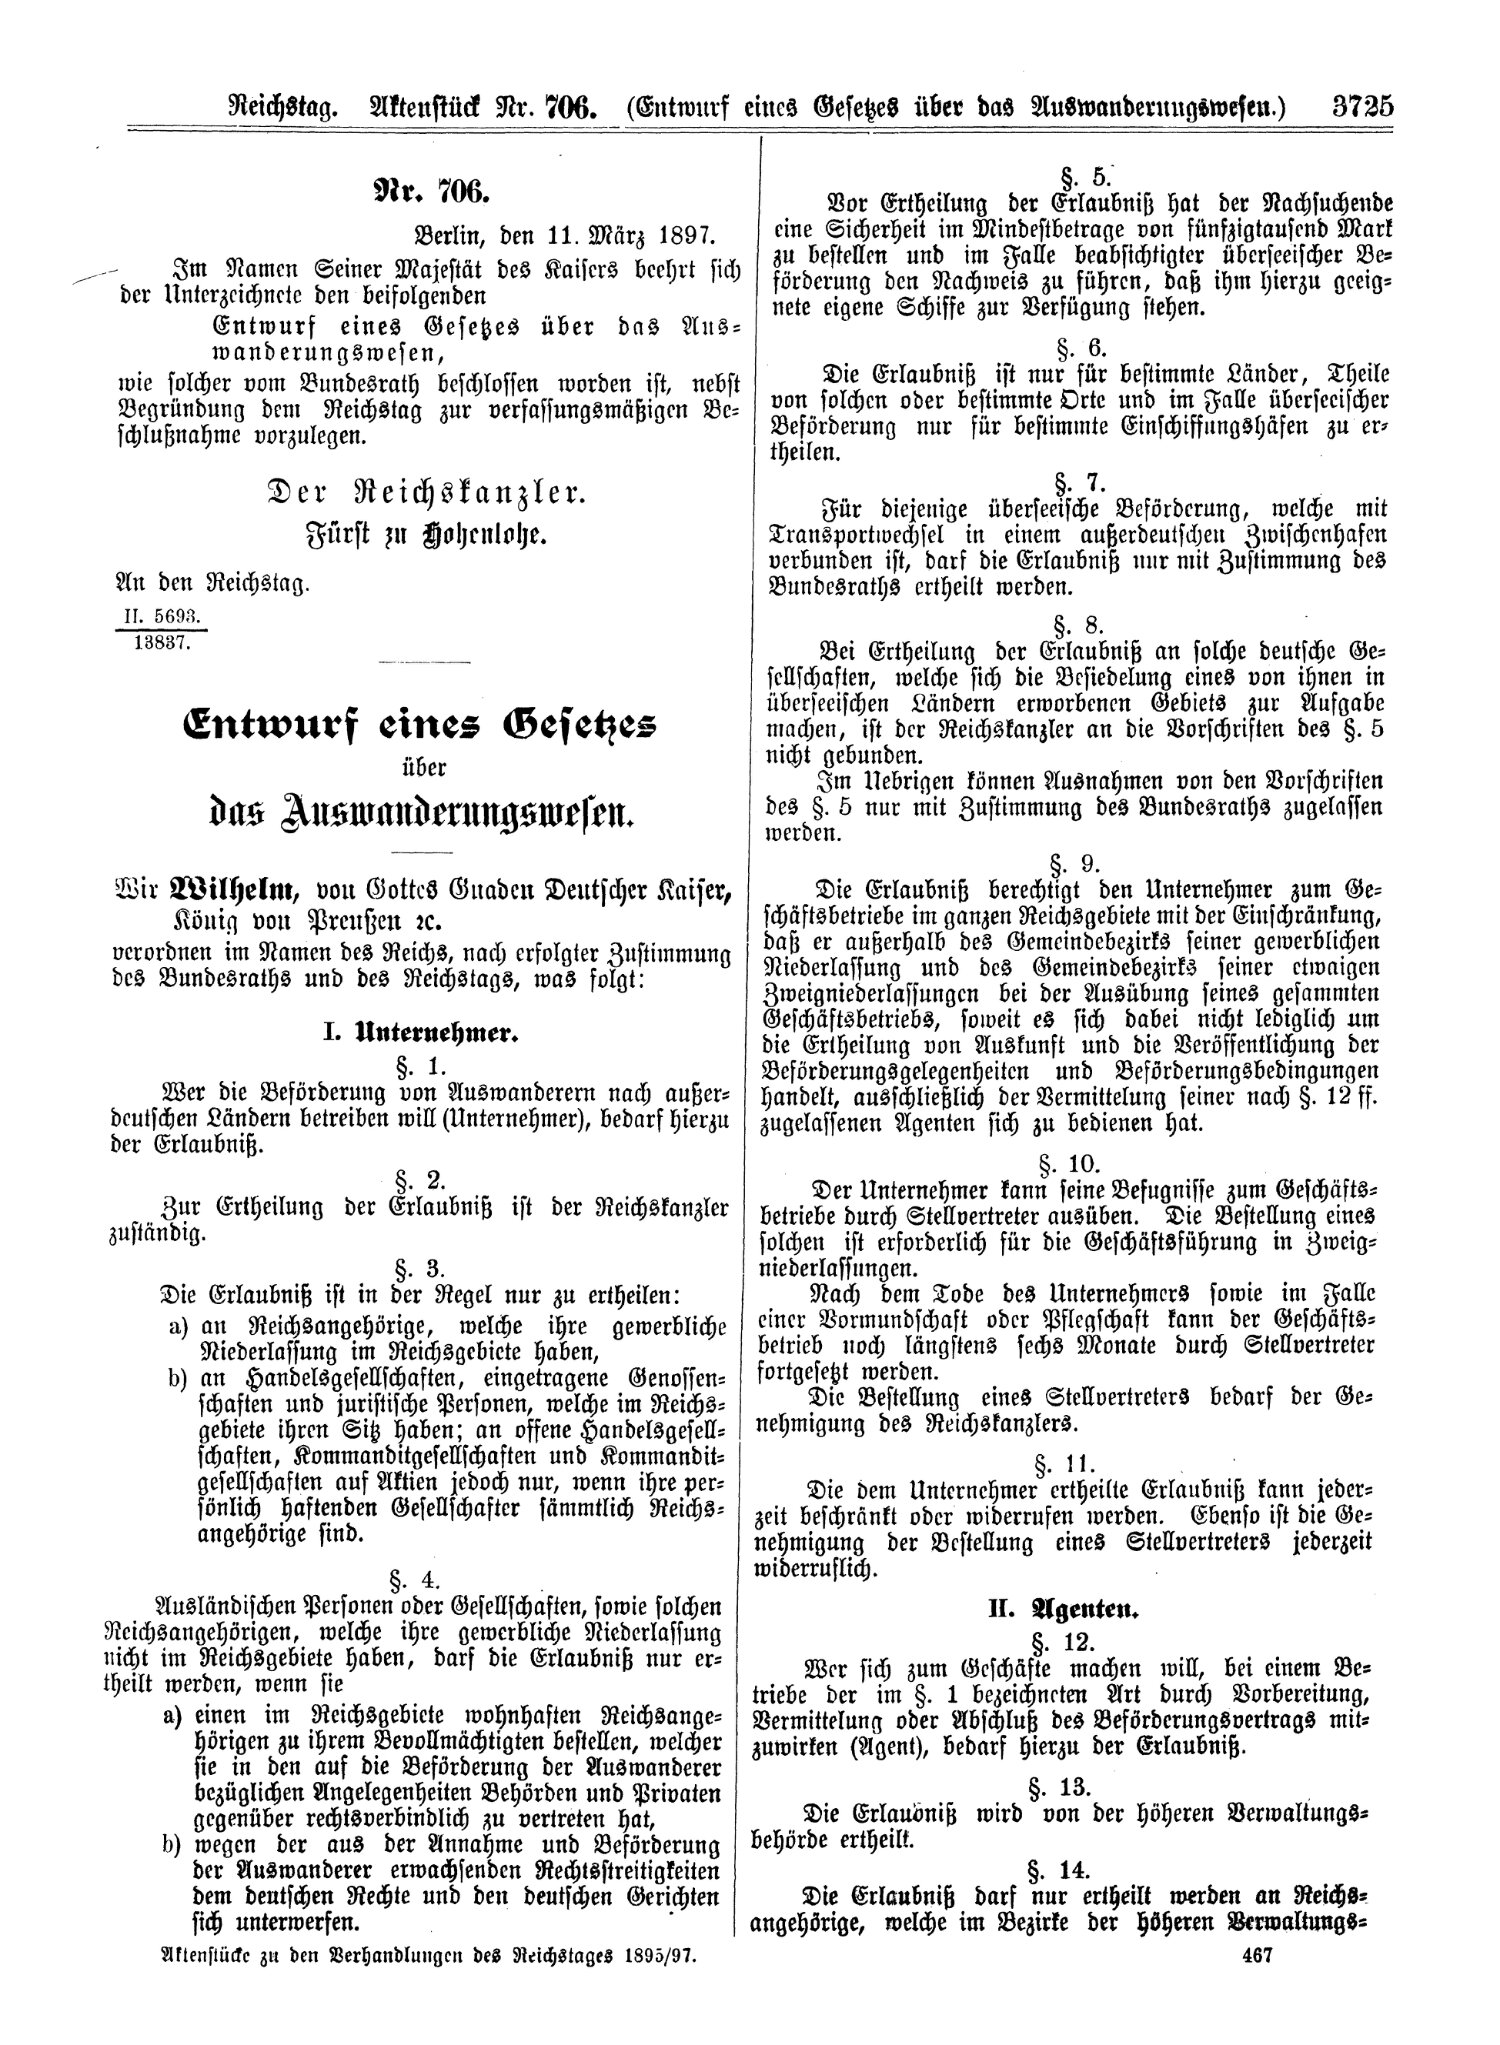 Scan of page 3725